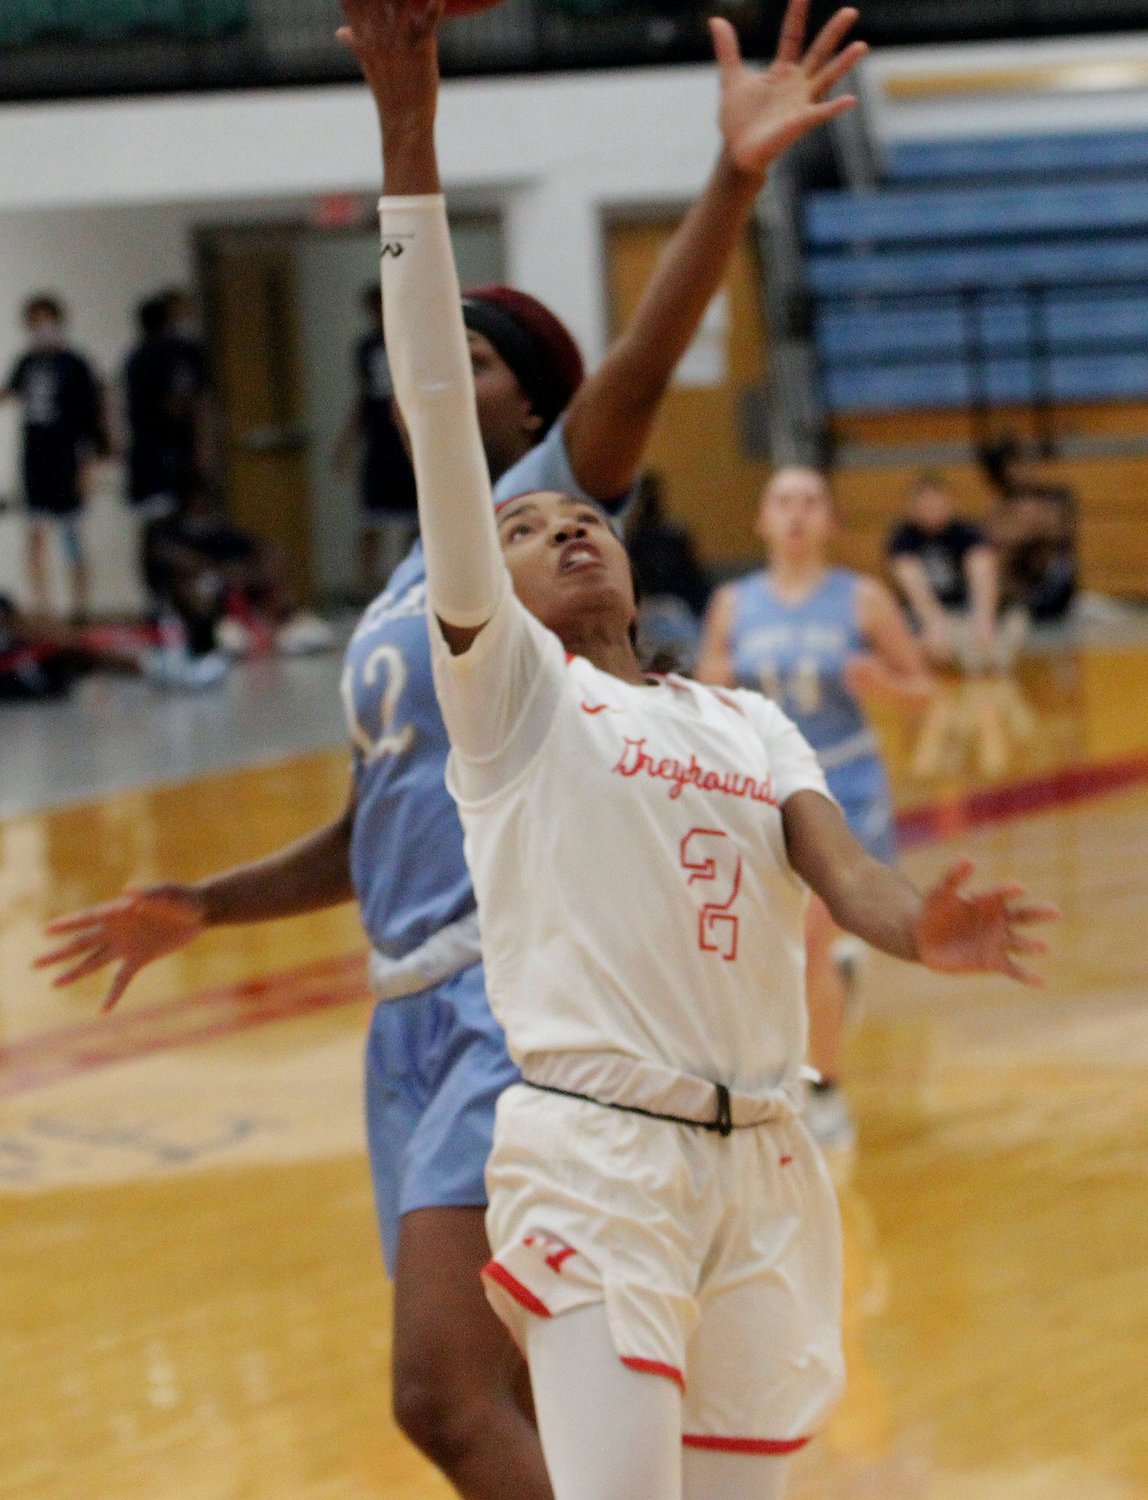 Bryce Dowell of the Moberly Area Community College Greyhounds scores two of her game-high 18 points in transition Saturday, helping the Lady Greyhounds keep State Fair CC winless this 2021 season when MACC punished their Region 16 guests 101-38.